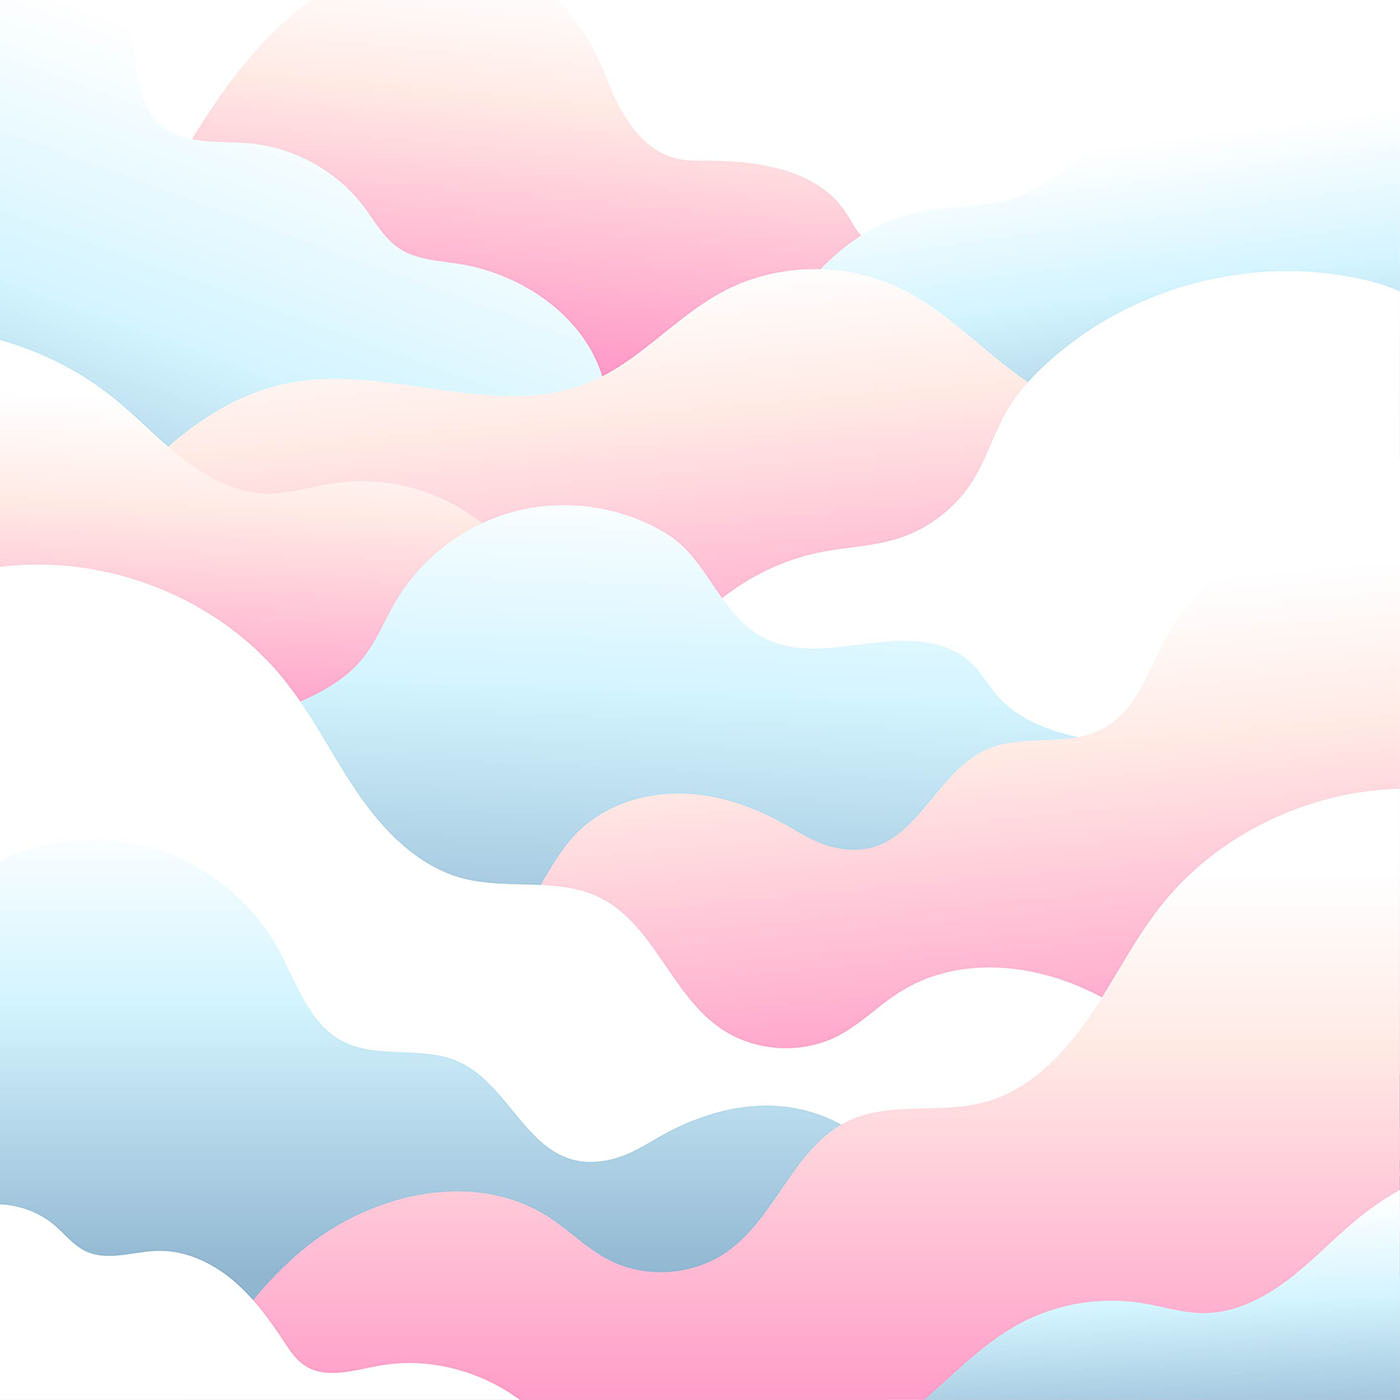  Abstract  Cloud Pastel  Background  Vector 278102 Download 